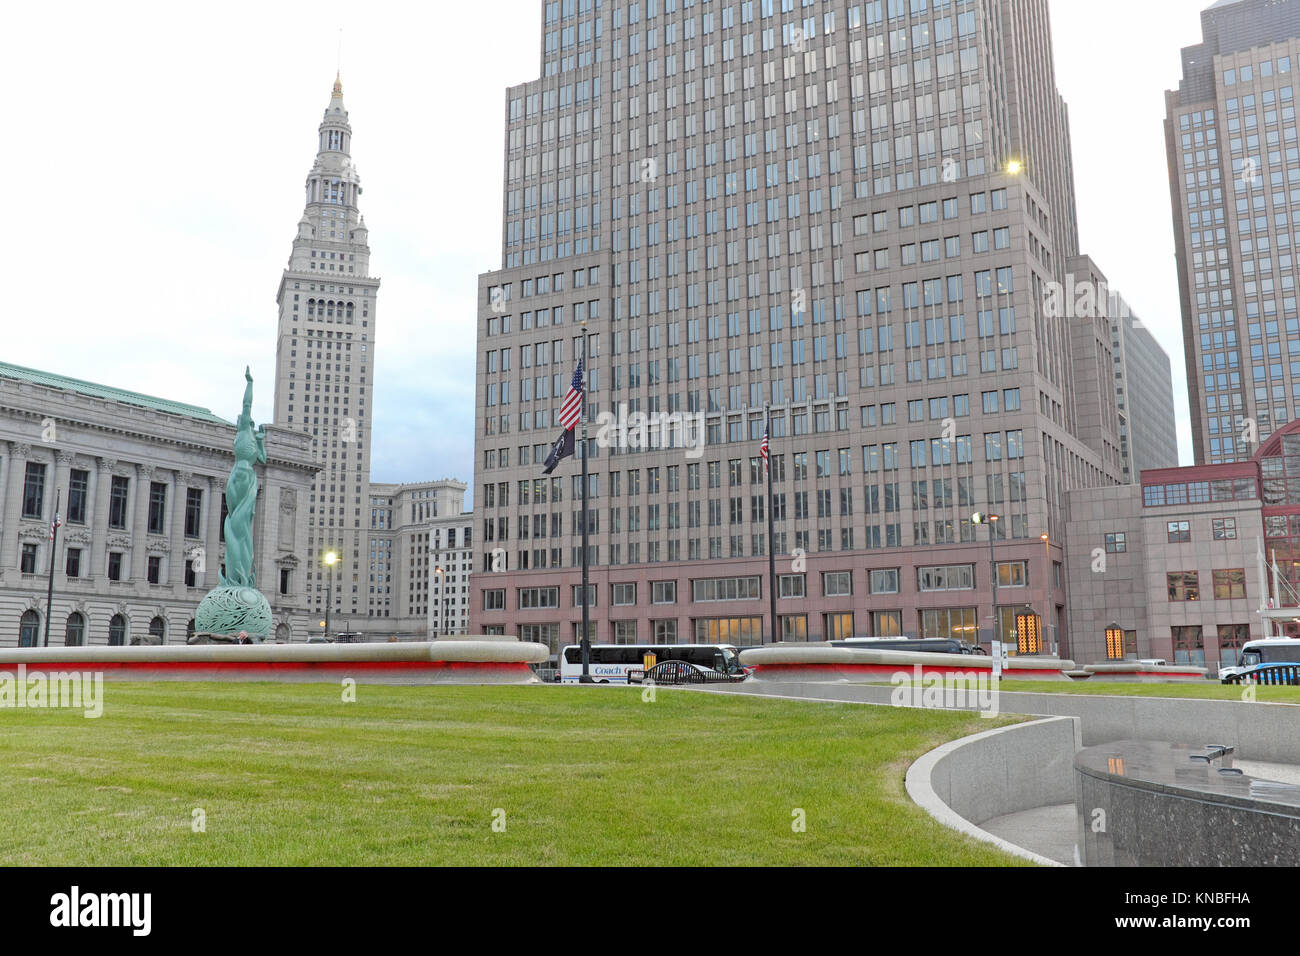 The outdoor grassy 'mall' area in downtown Cleveland, Ohio, flanked by iconic landmarks including the Fountain of Eternal Life statue on a fall day. Stock Photo